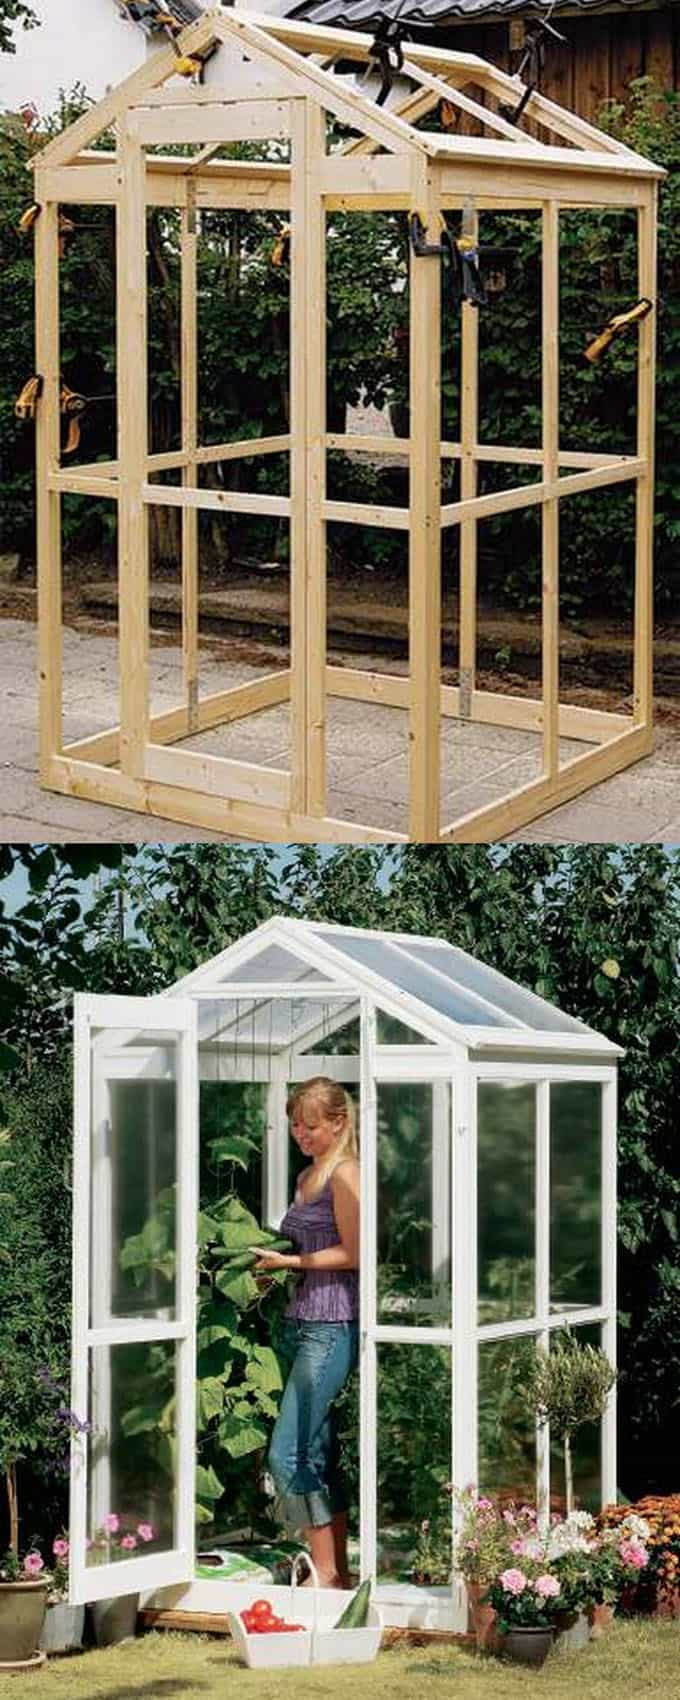 DIY Greenhouse Plans
 42 Best DIY Greenhouses with Great Tutorials and Plans